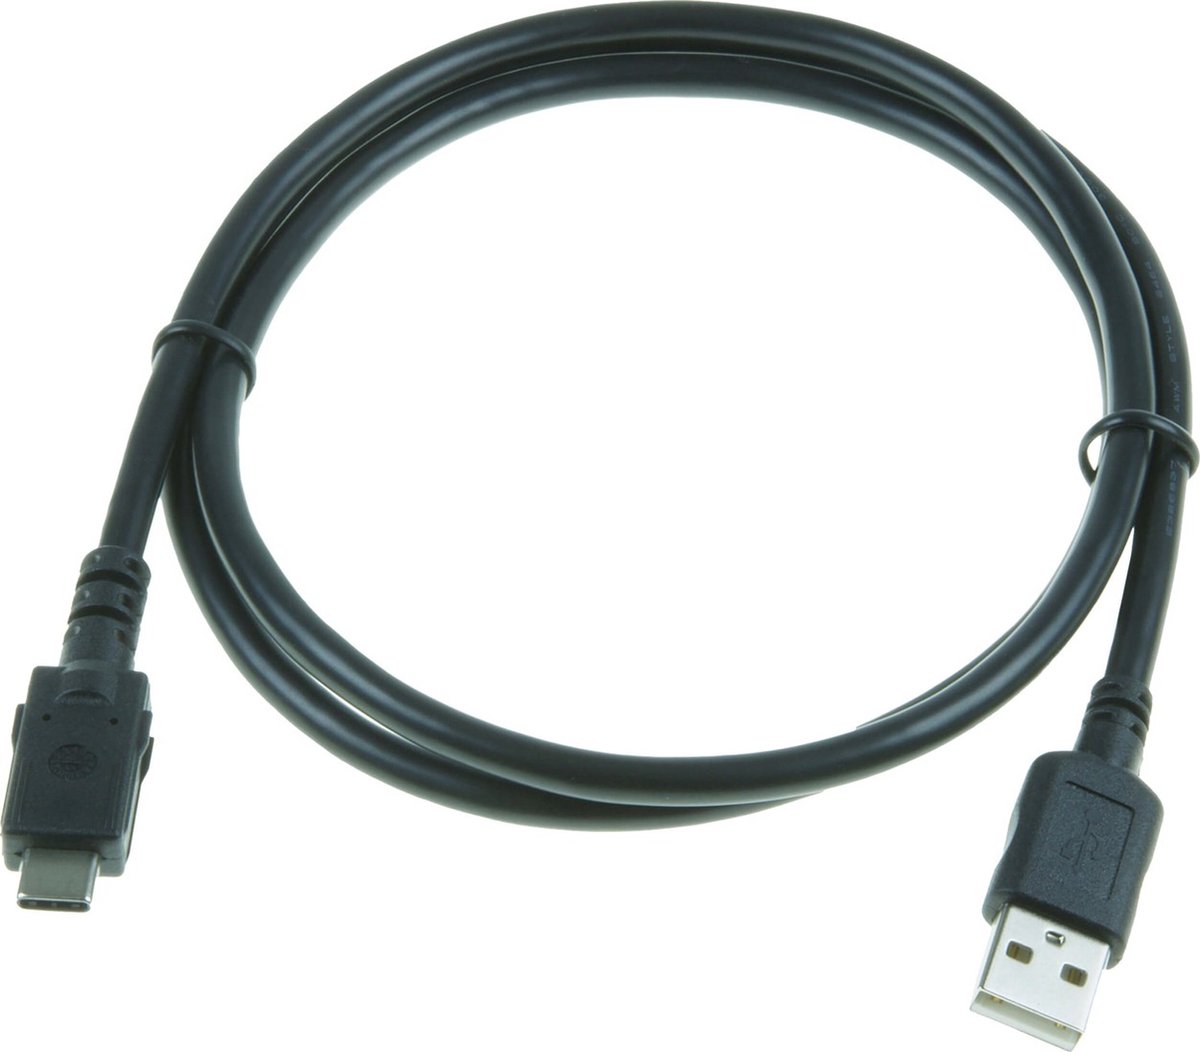 USB-C PORT PLUG FOR USE WITH